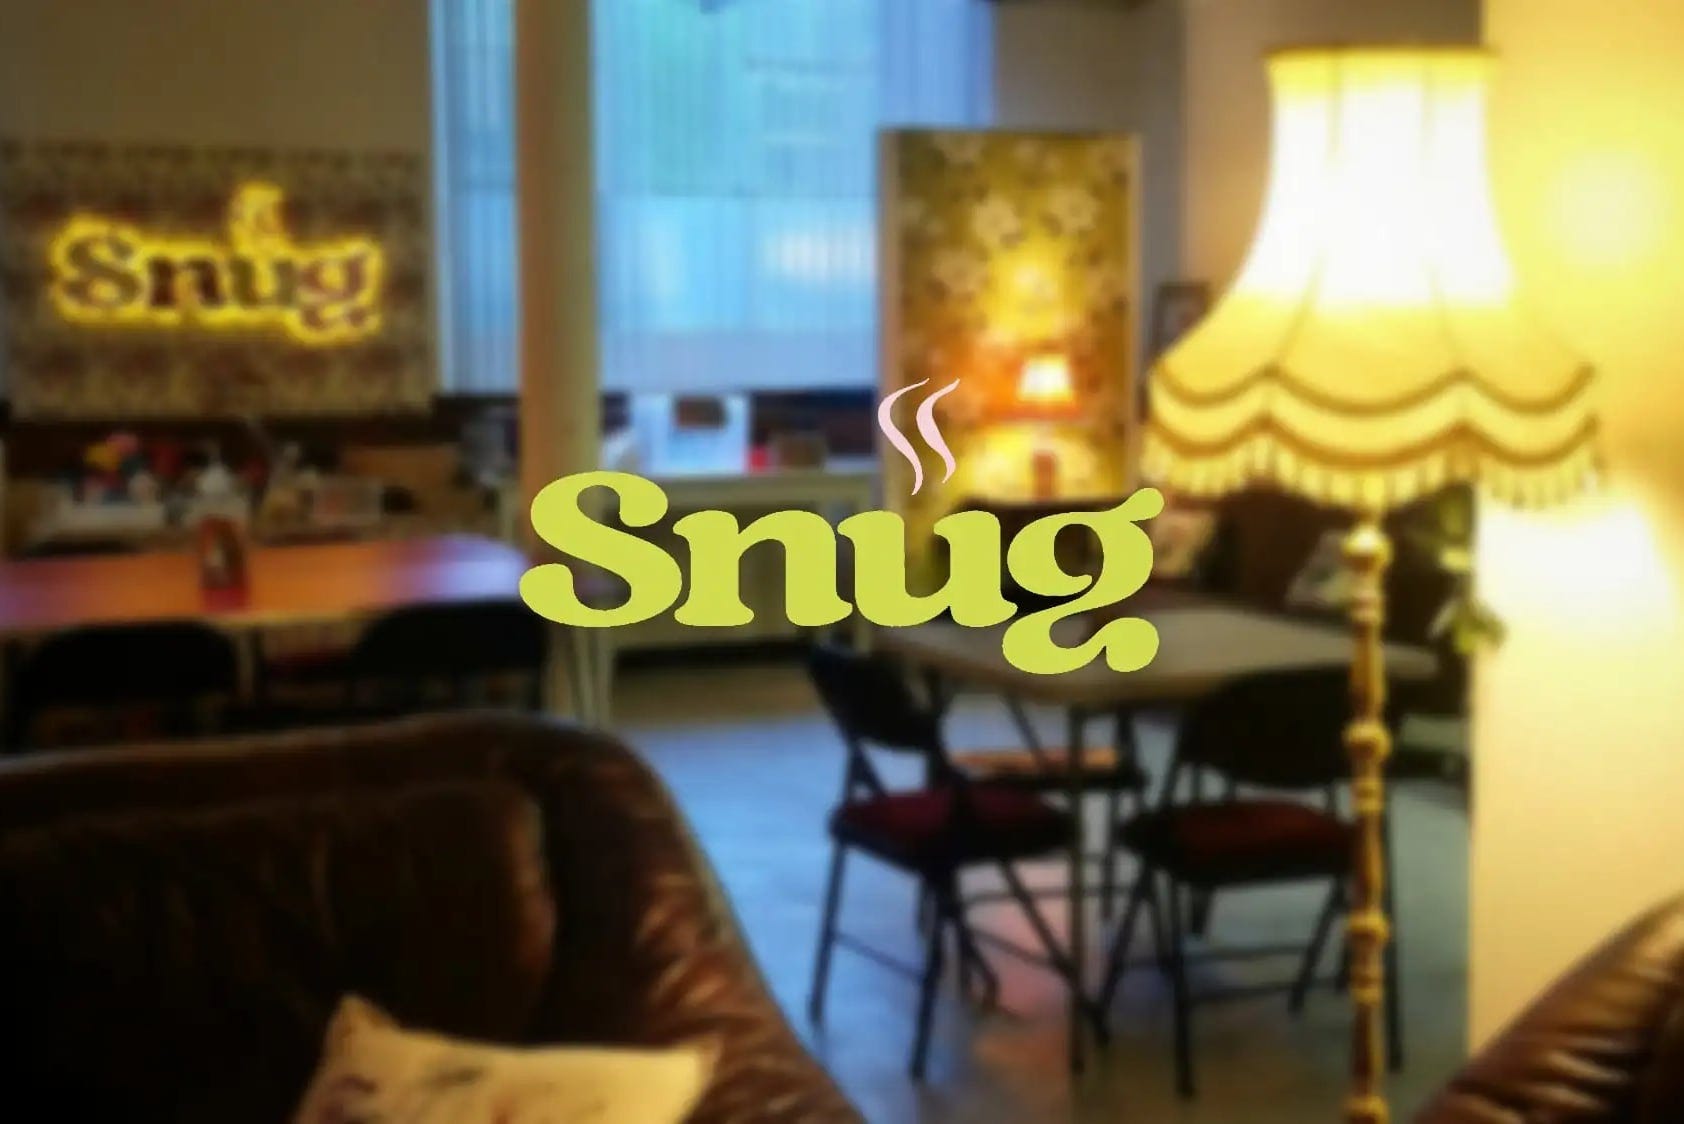 This image shows a cosy, warmly lit room that has an inviting and homely feel. In the foreground, a comfortable-looking brown leather armchair with a cushion invites relaxation. The middle ground reveals a table and chairs, suggesting a dining or social area. A decorative lamp stands to the right, casting a soft glow. The word "Snug," in a large, playful, and bold yellow font with steam lines rising from the 'u', suggests warmth and comfort, overlaying the scene. Behind it, on the back wall, is a blurred neon sign with the same word "Snug," echoing the text in the foreground, enhancing the ambience of the setting.